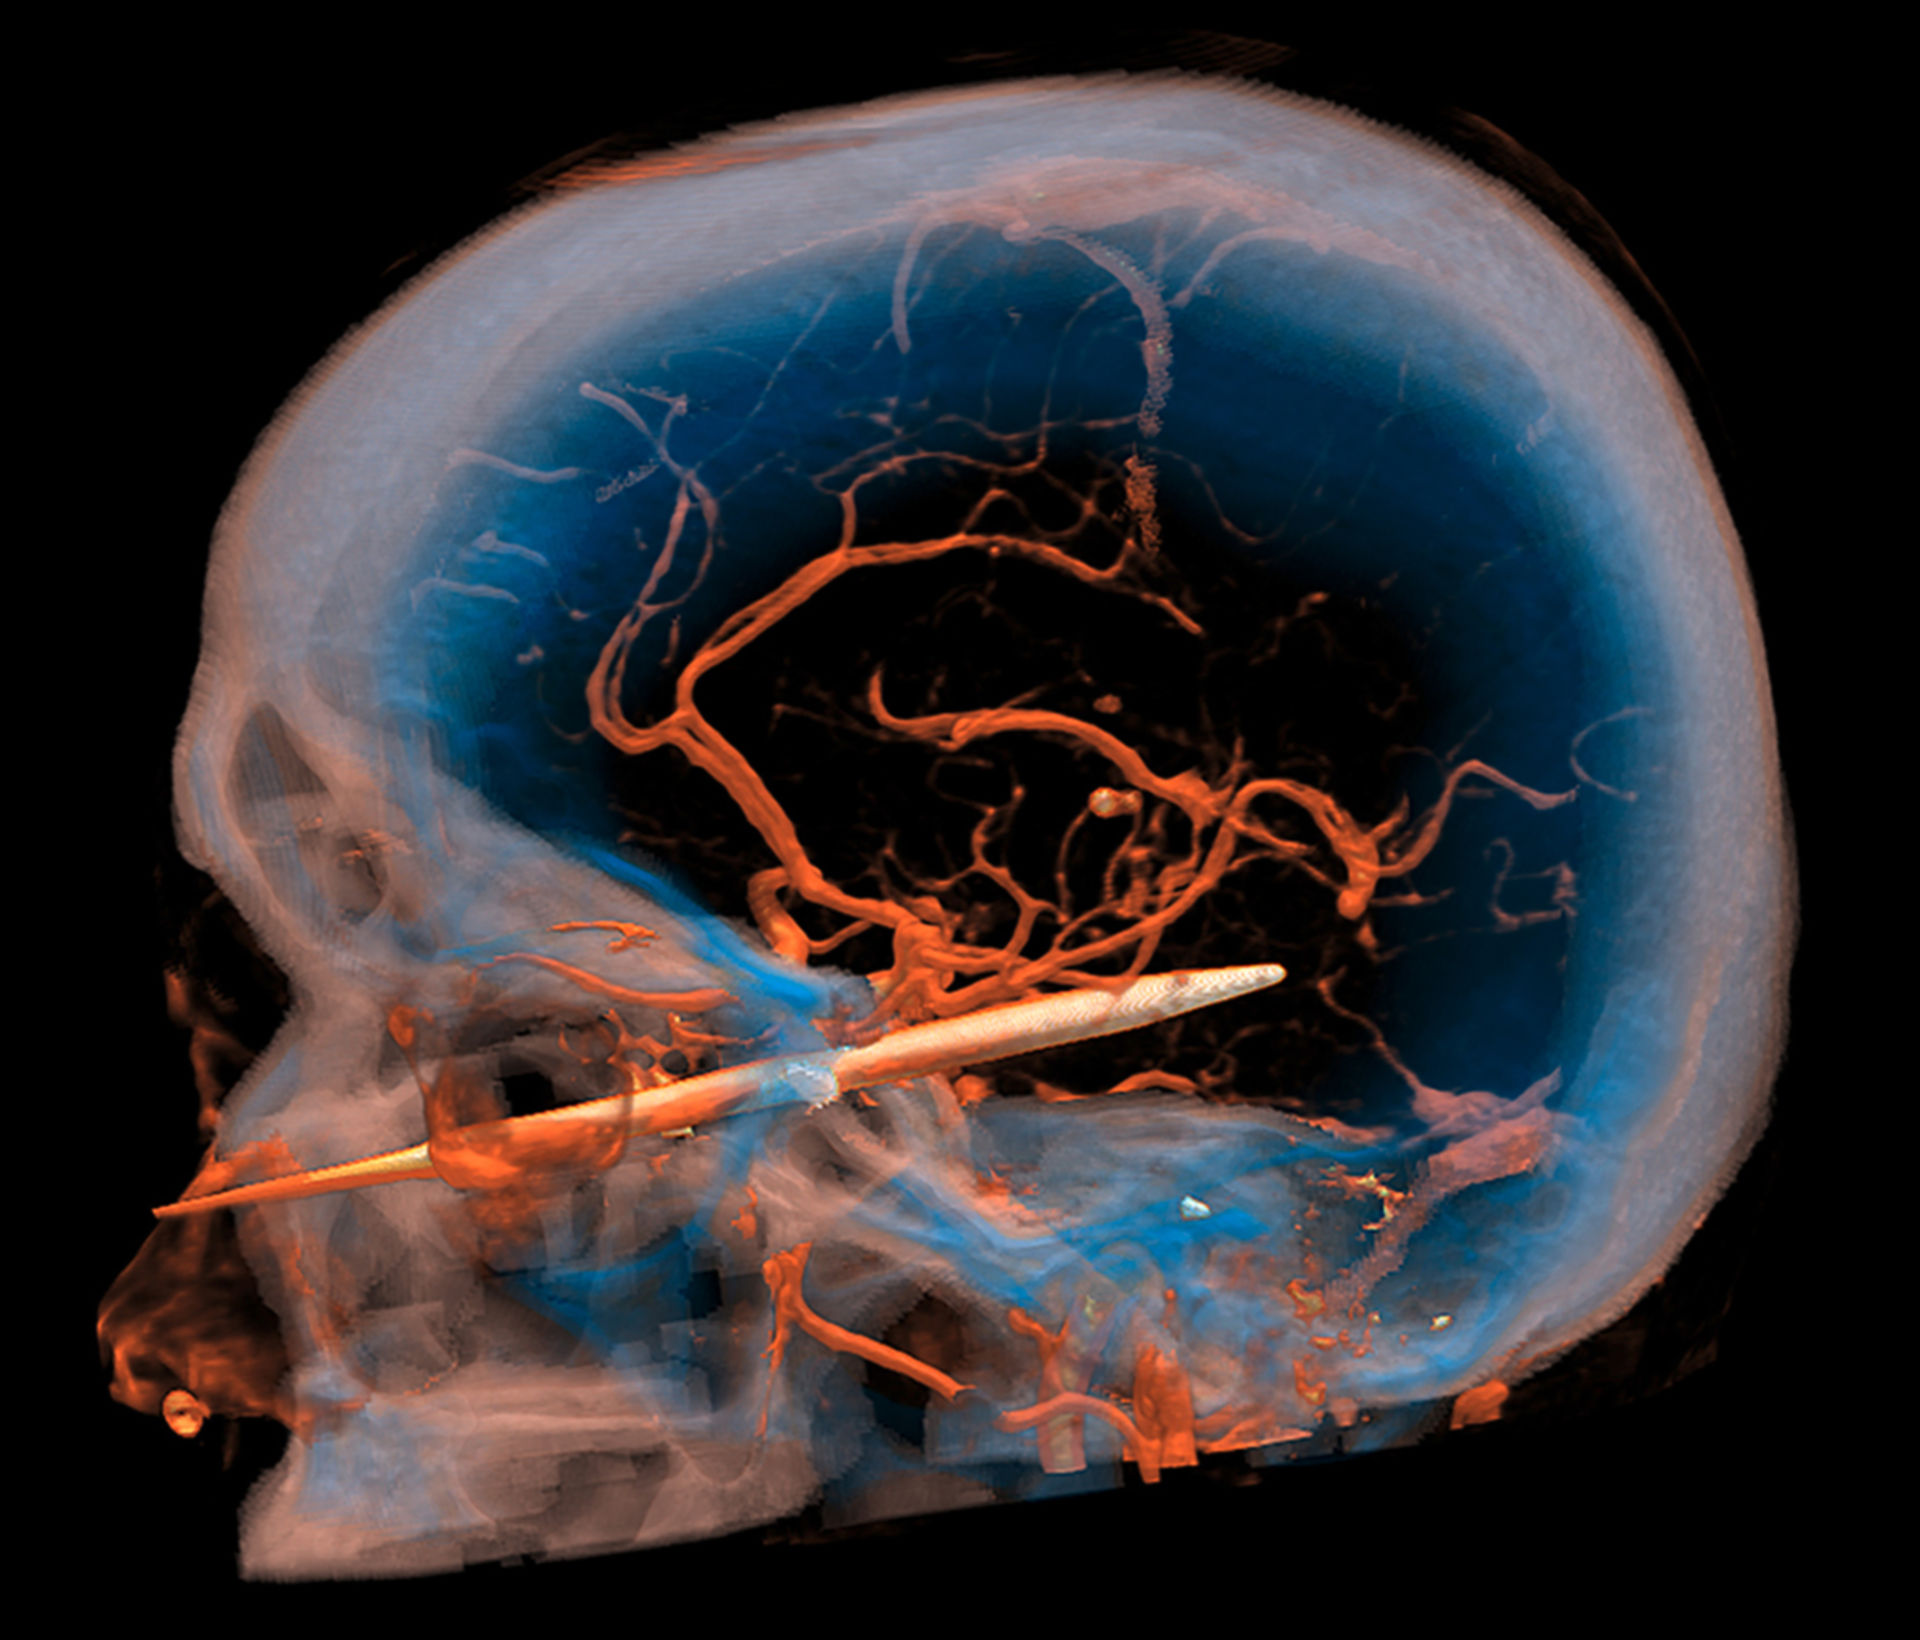 Third contest for computed tomography images – 